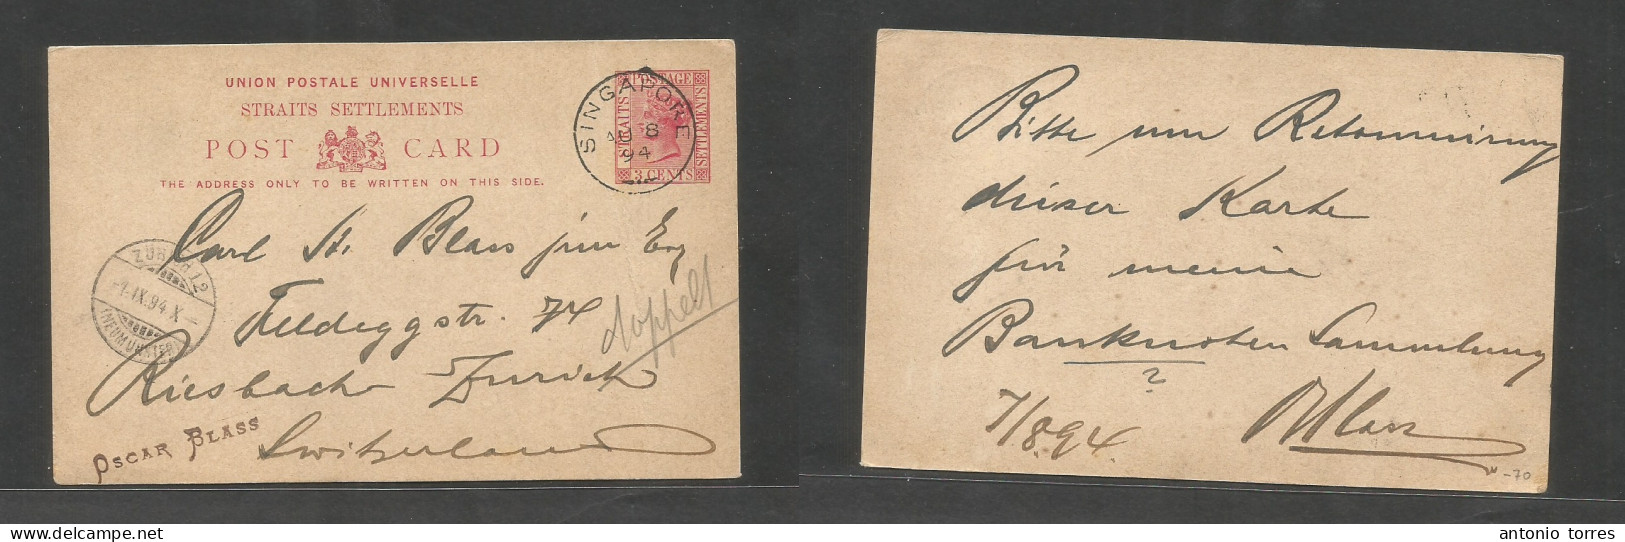 Straits Settlements Singapore. 1894 (8 Aug) Sing - Switzerland, Resbach (1 Sept) 3c Red QV Stat Card, Cds VF Used. - Singapour (1959-...)